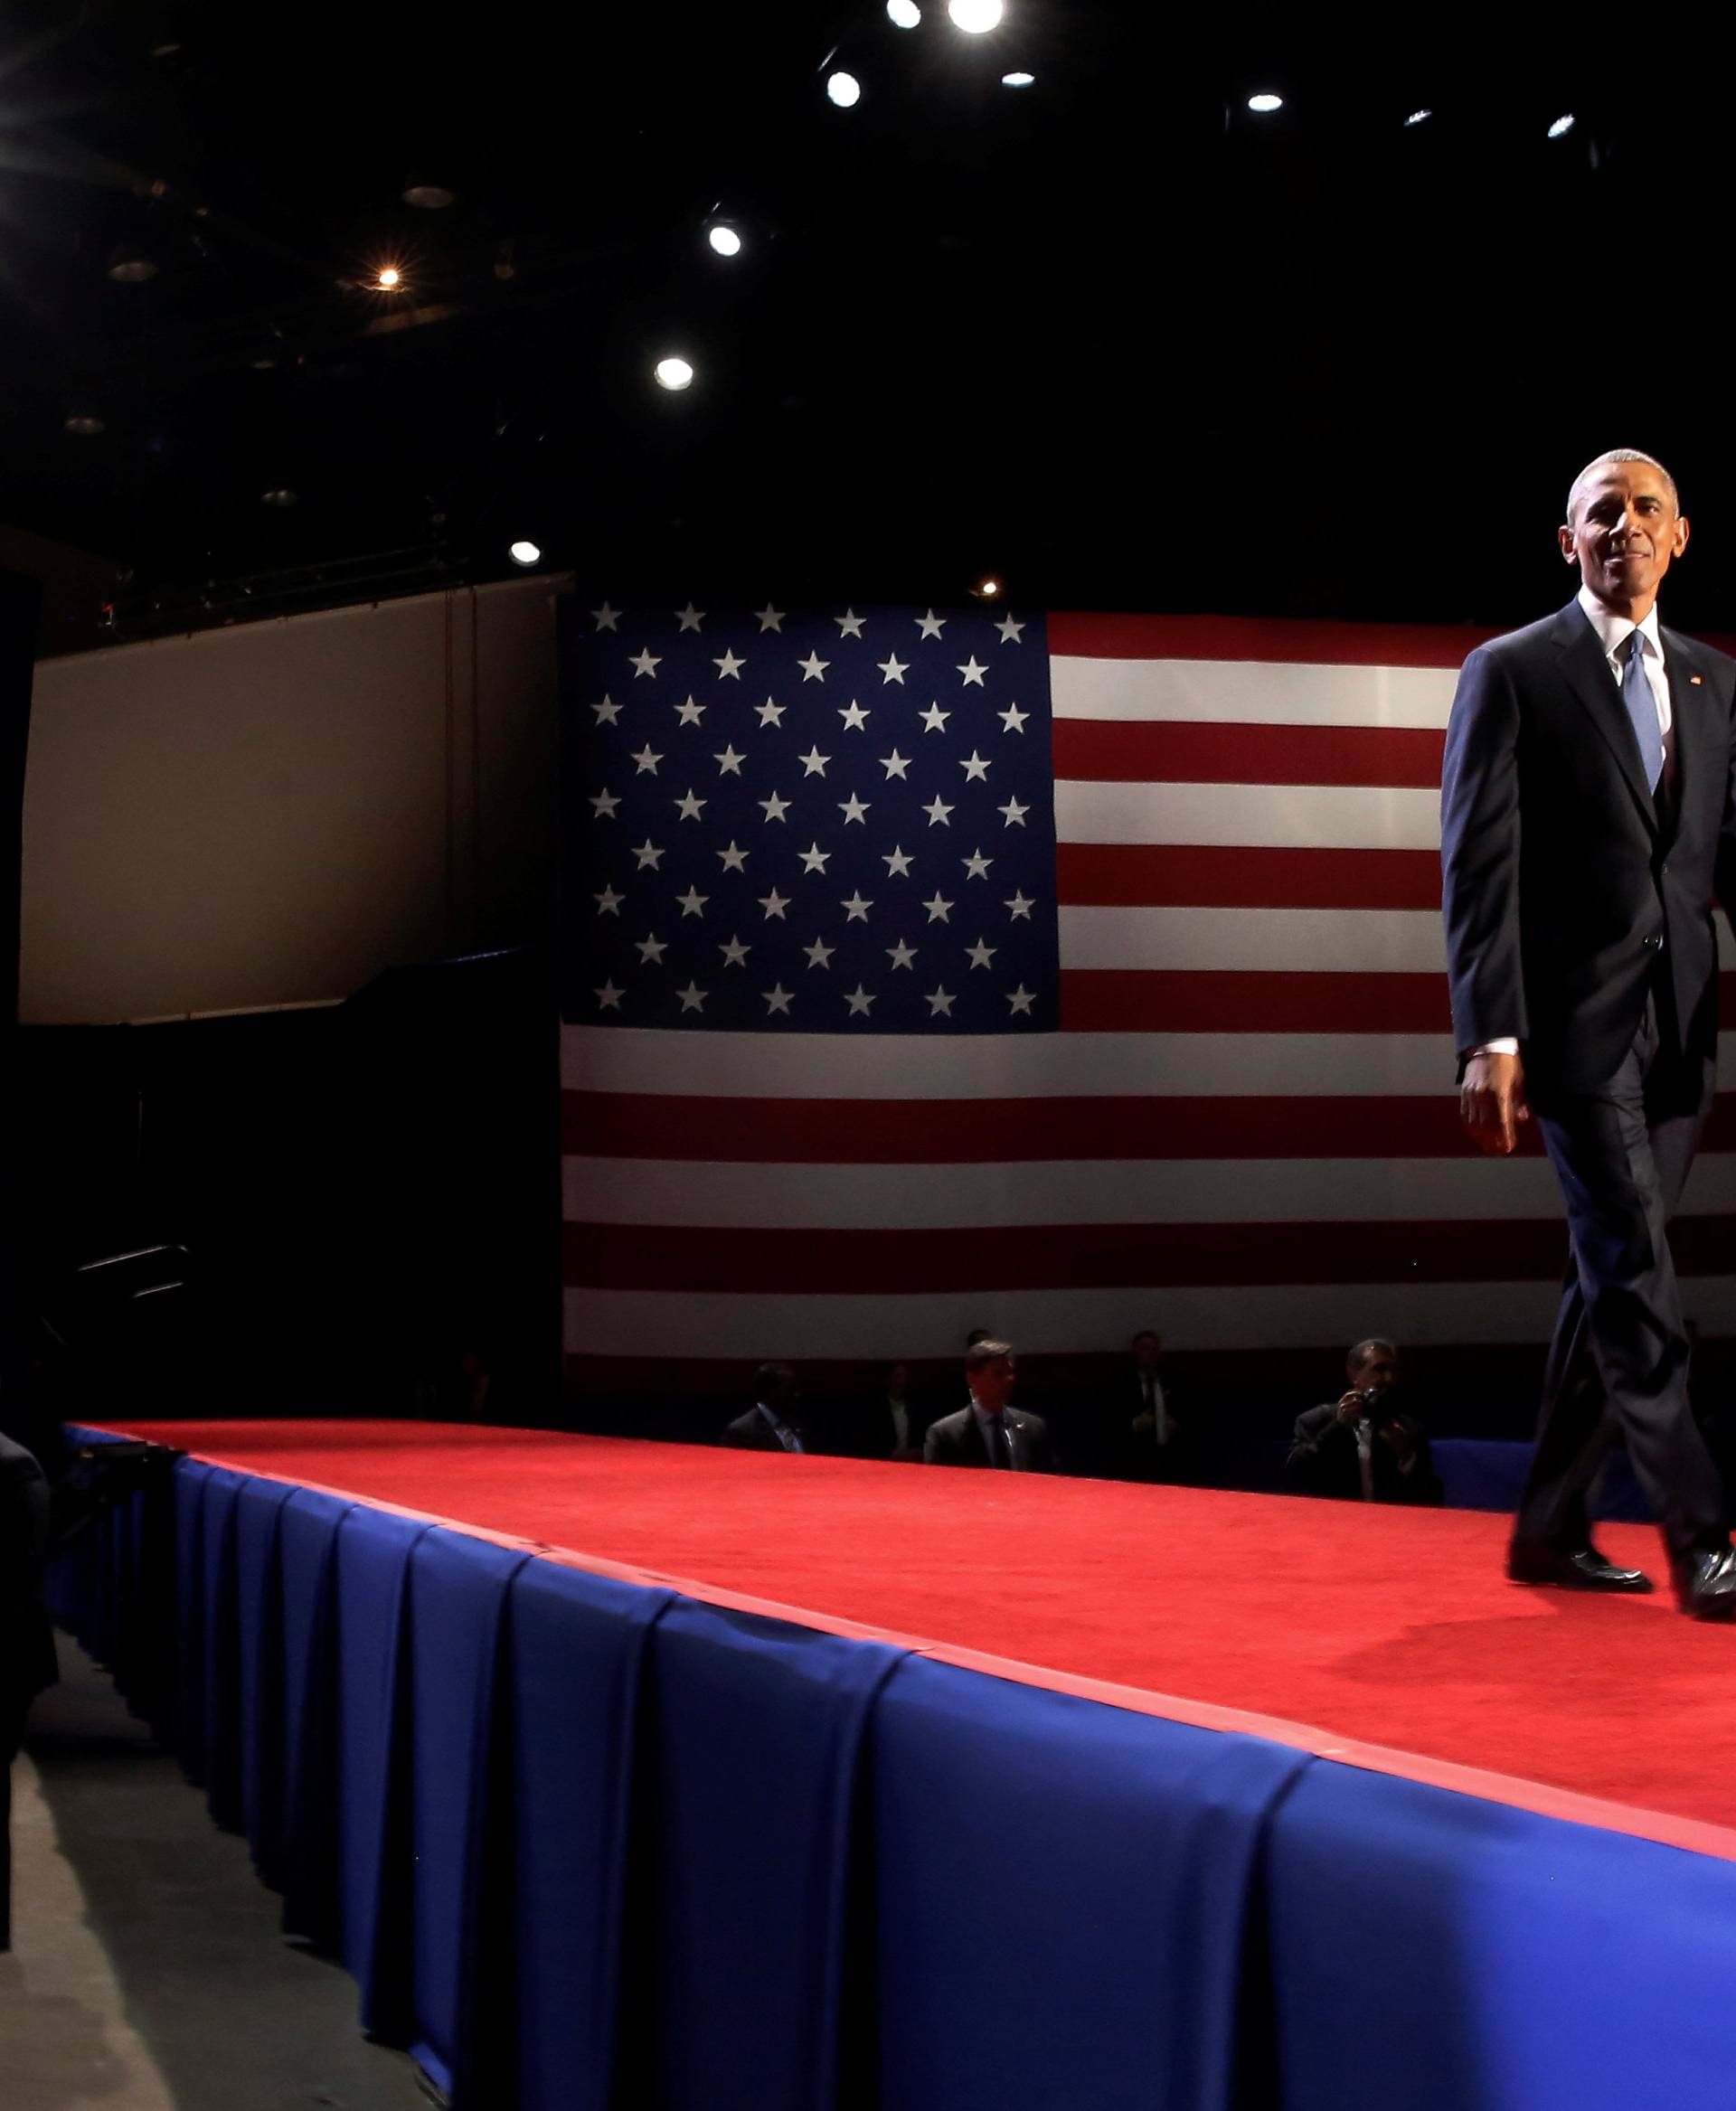 U.S. President Barack Obama takes the stage to deliver his farewell address in Chicago